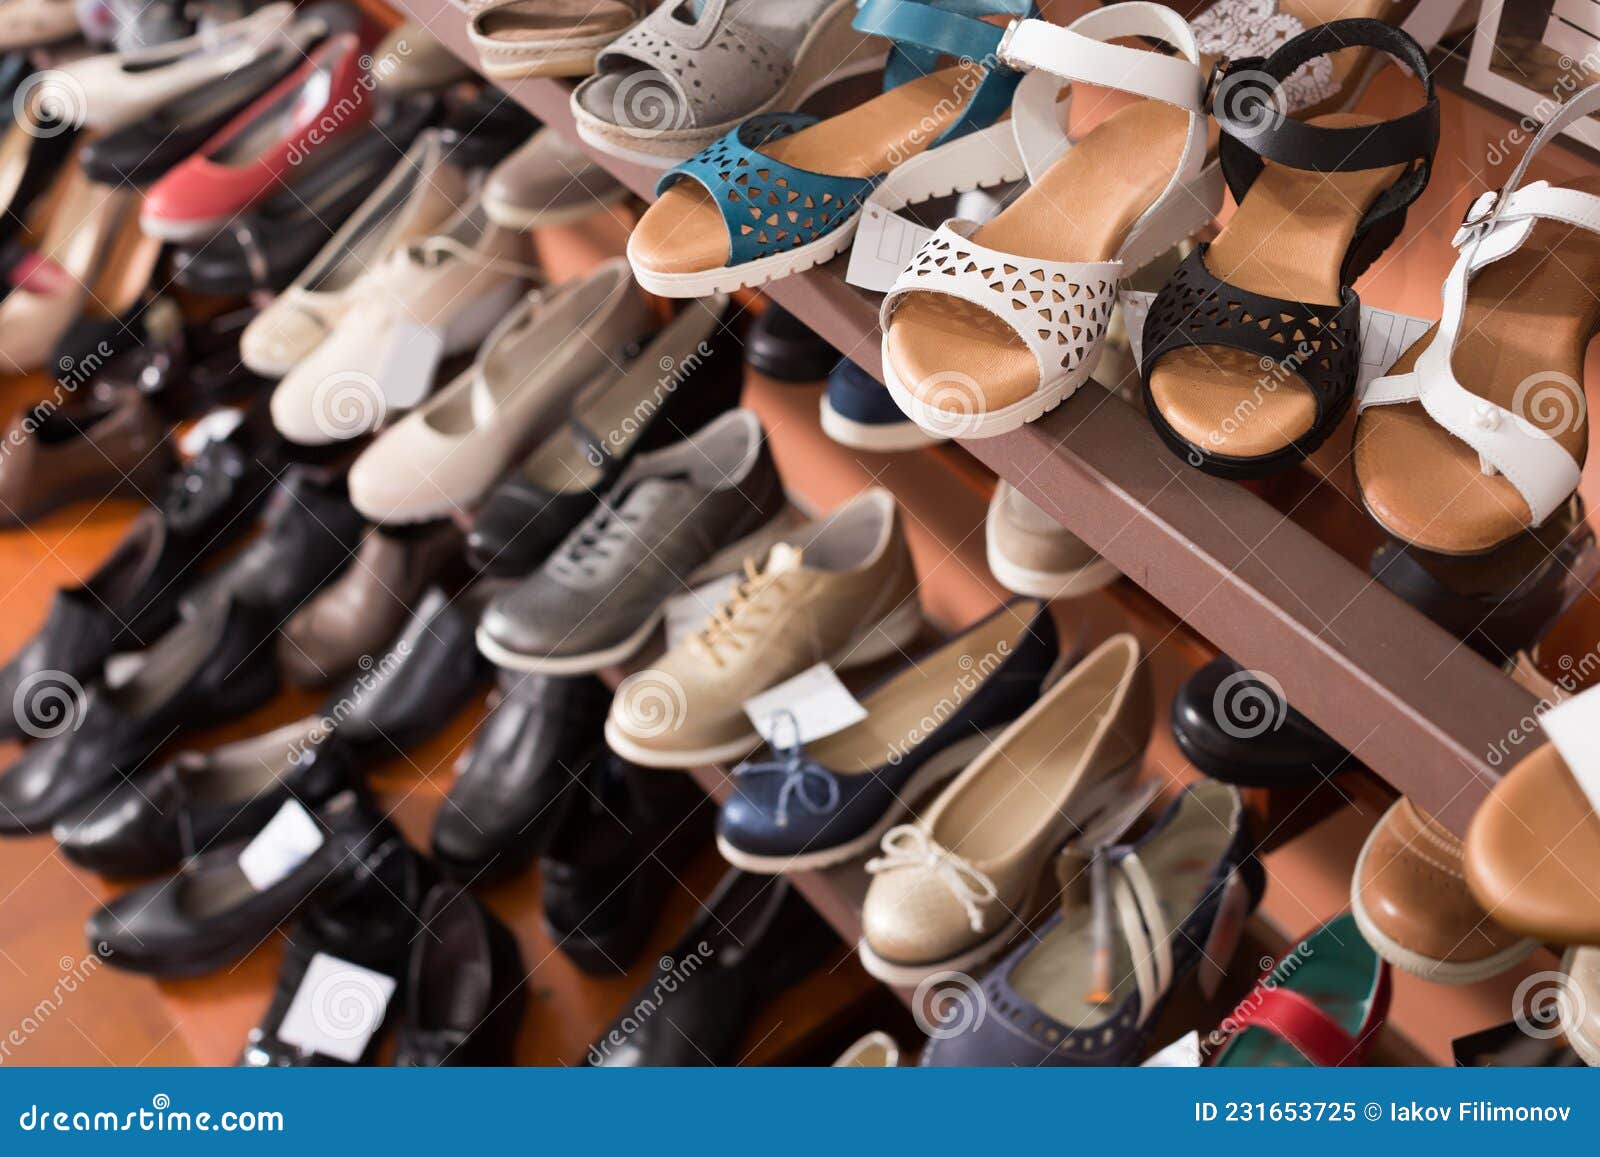 Shoes are Standing on Shelves Stock Image - Image of colorful, modern ...